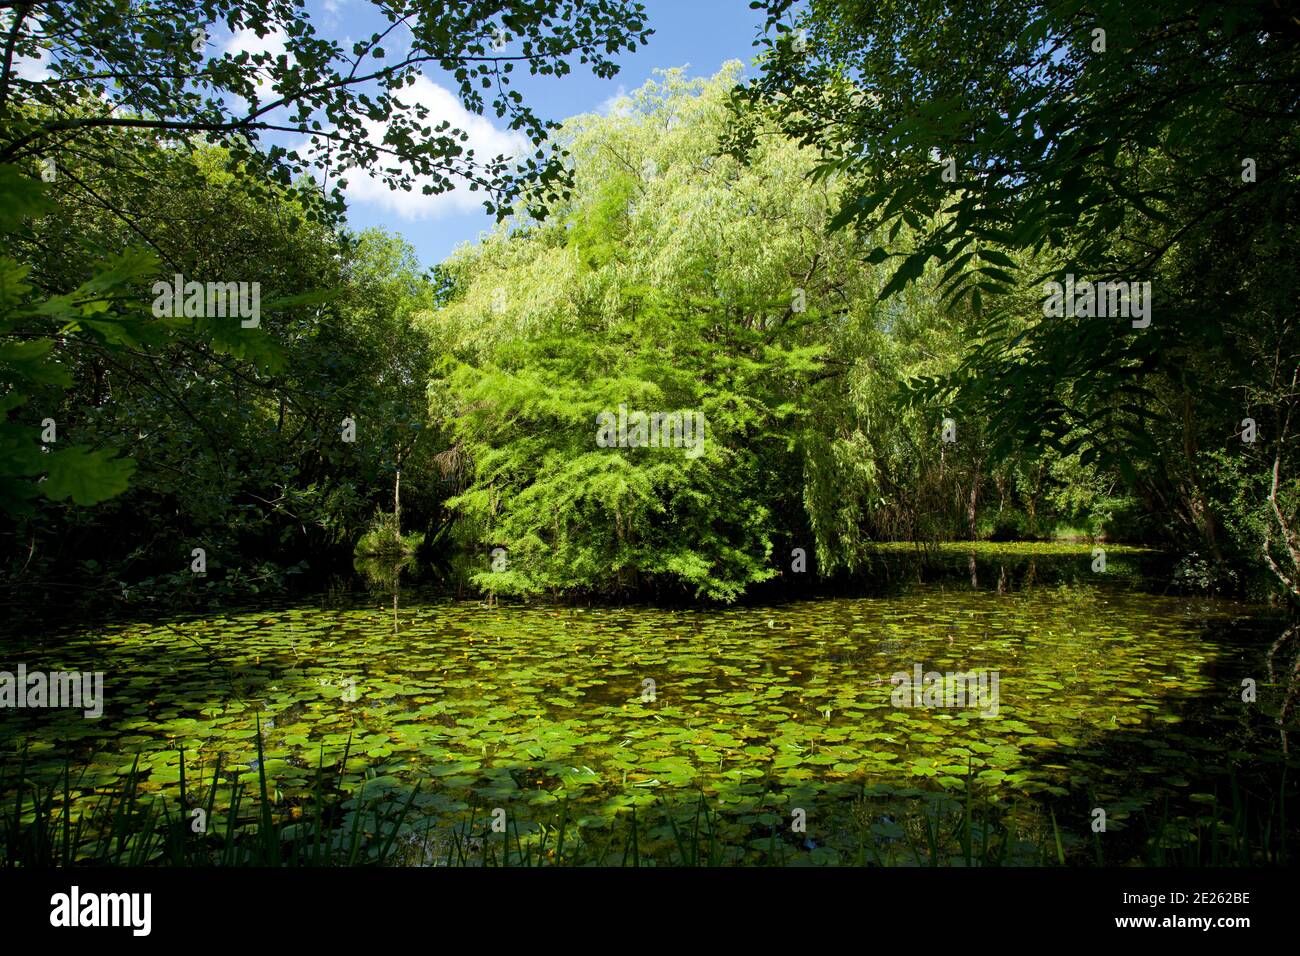 Large garden pond or lake with water lily pads, surrounded by trees Stock Photo